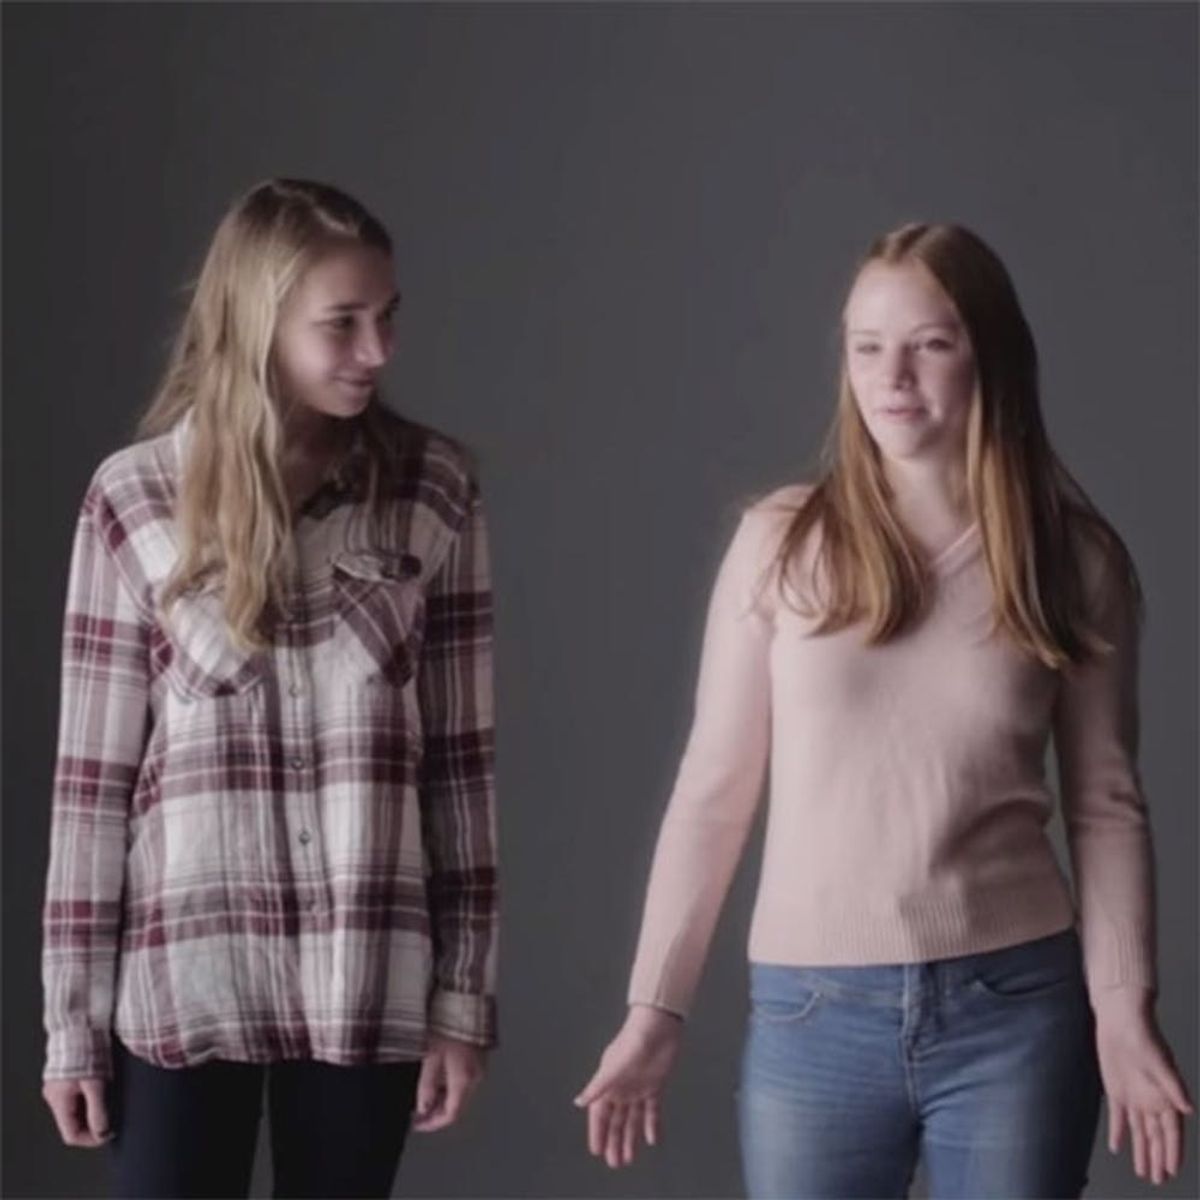 Watch This Video of Women Sharing the Awkward Story of Their First Period